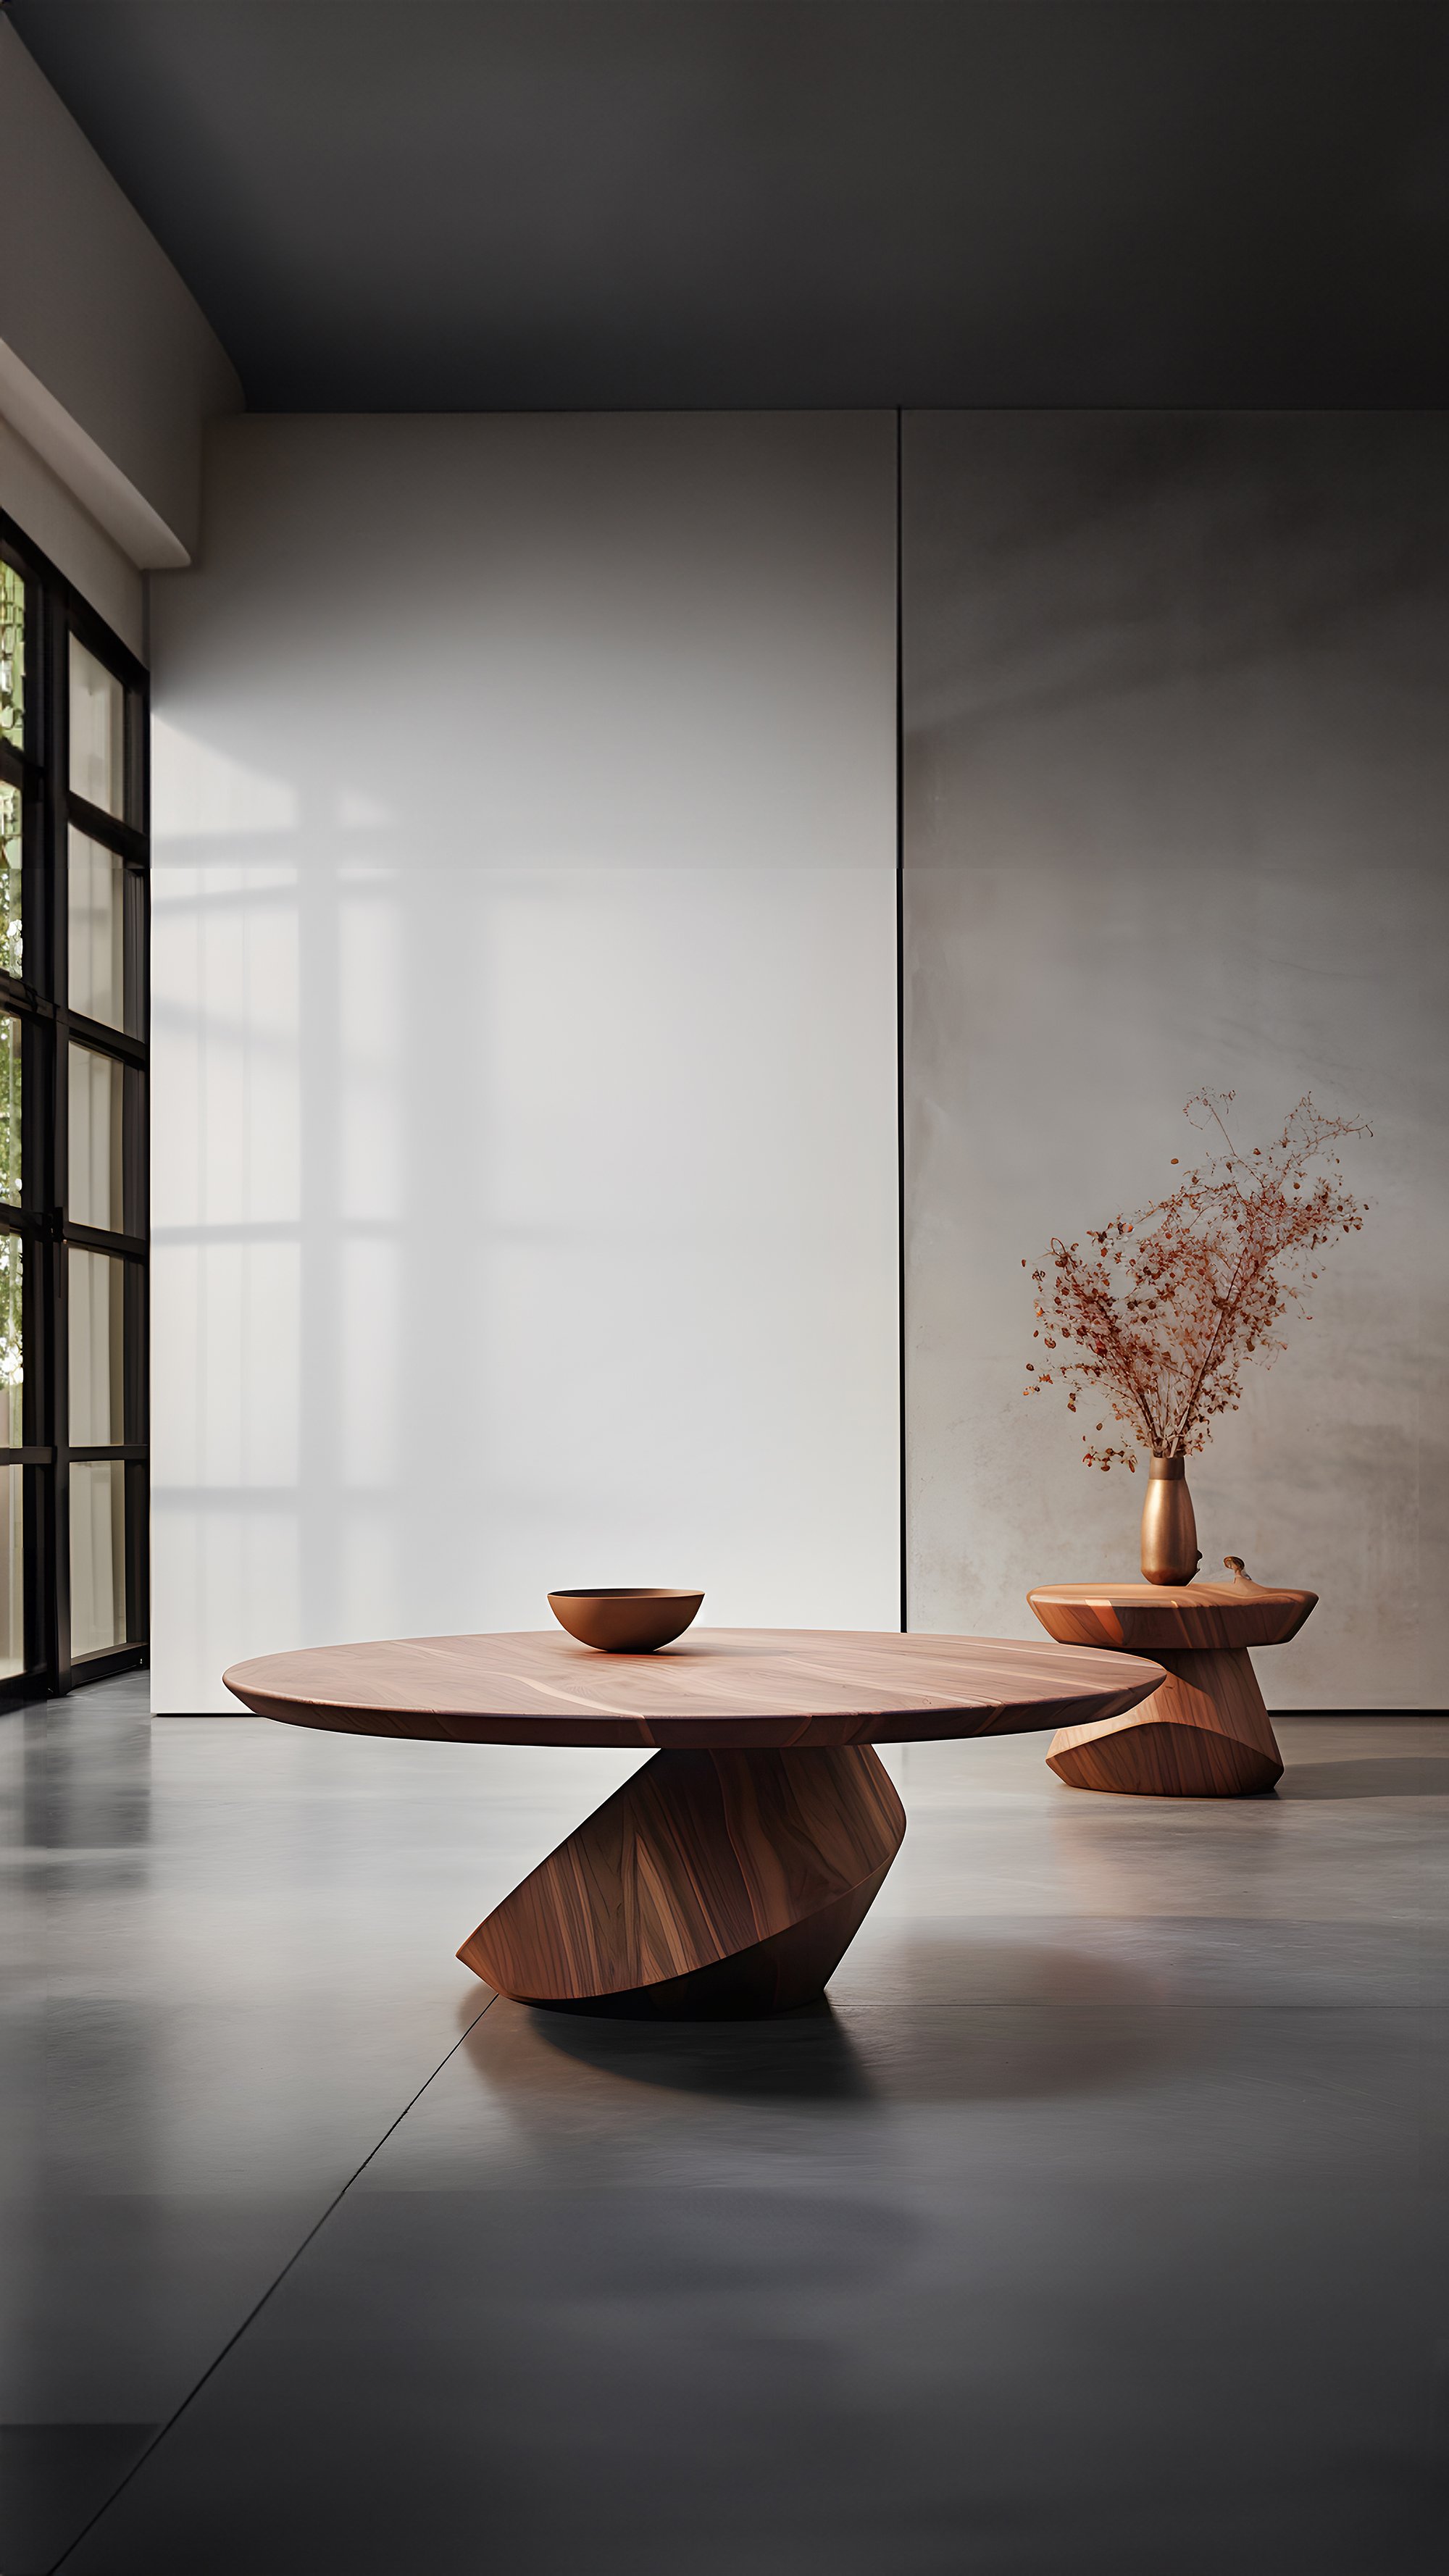 Sculptural Coffee Table Made of Solid Wood, Center Table Solace S40 by Joel Escalona — 7.jpg